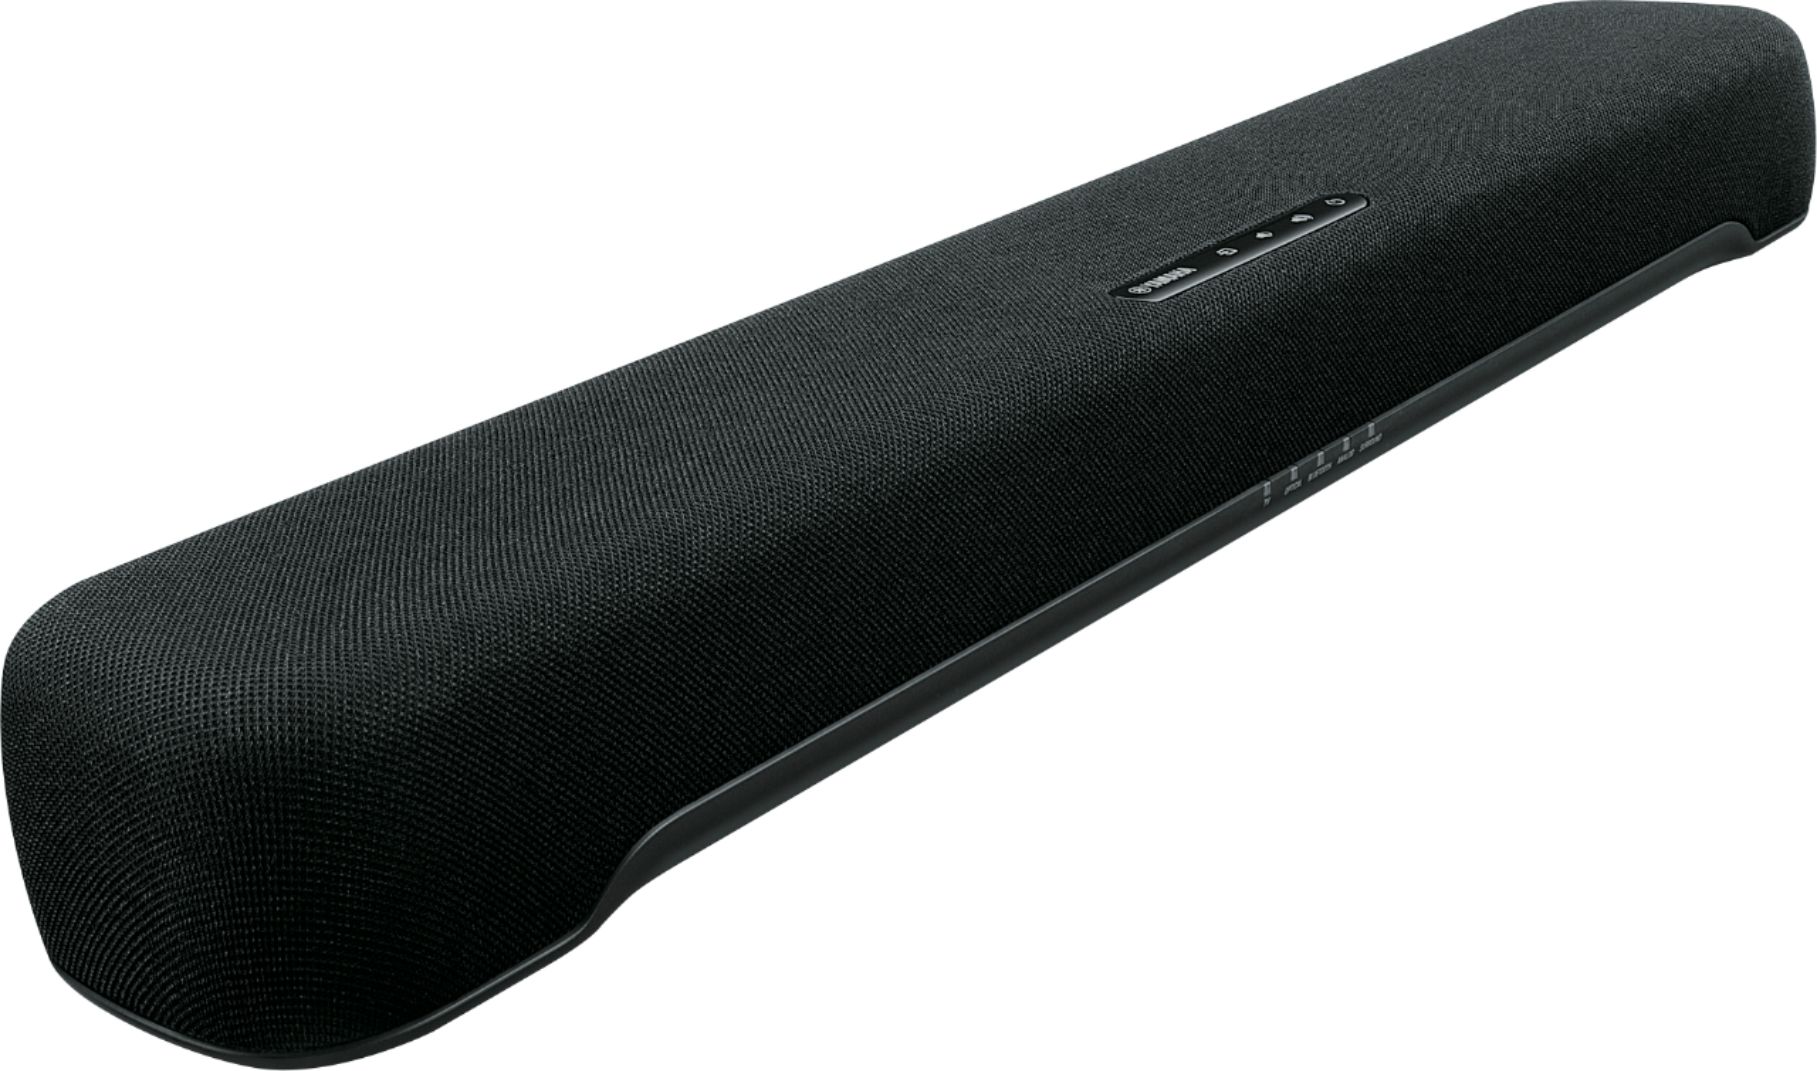 Angle View: Yamaha - 2.1-Channel Soundbar with Built-in Subwoofer - Black